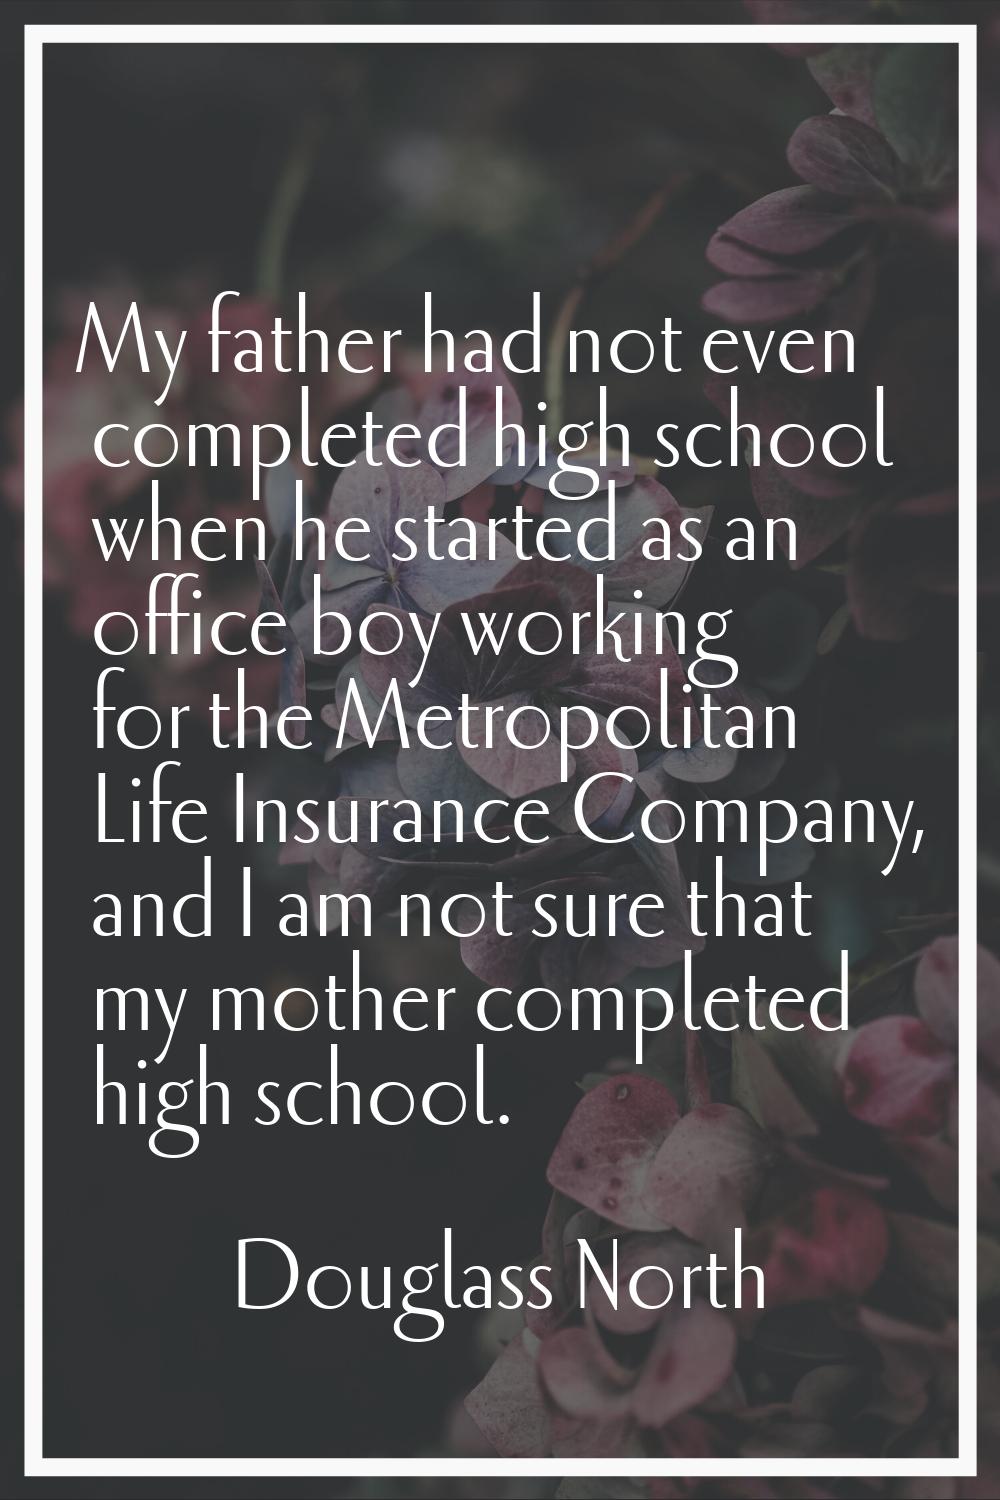 My father had not even completed high school when he started as an office boy working for the Metro